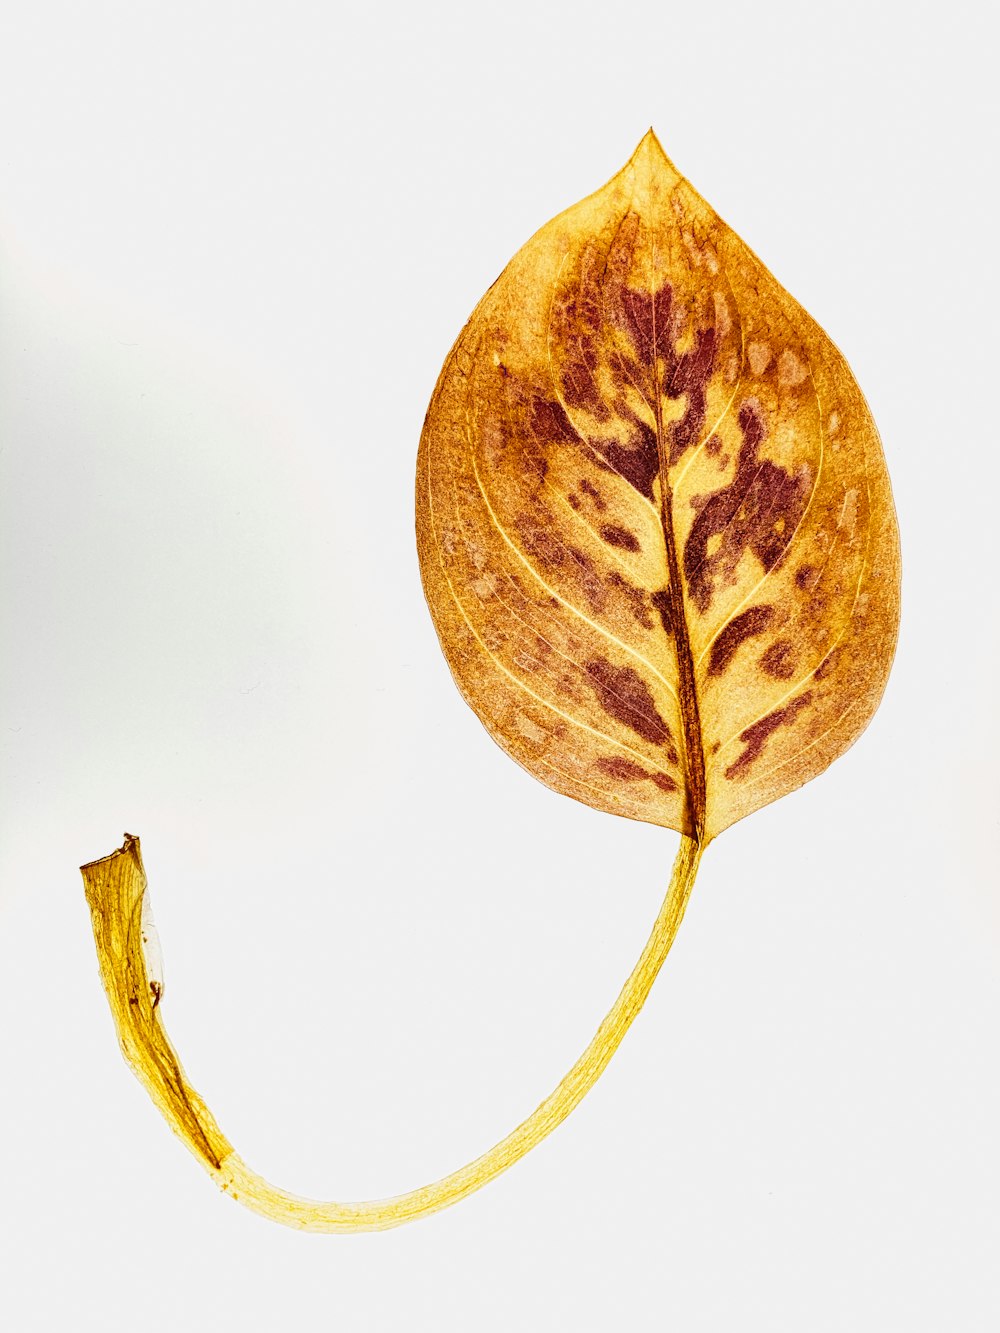 yellow and brown leaf on white background